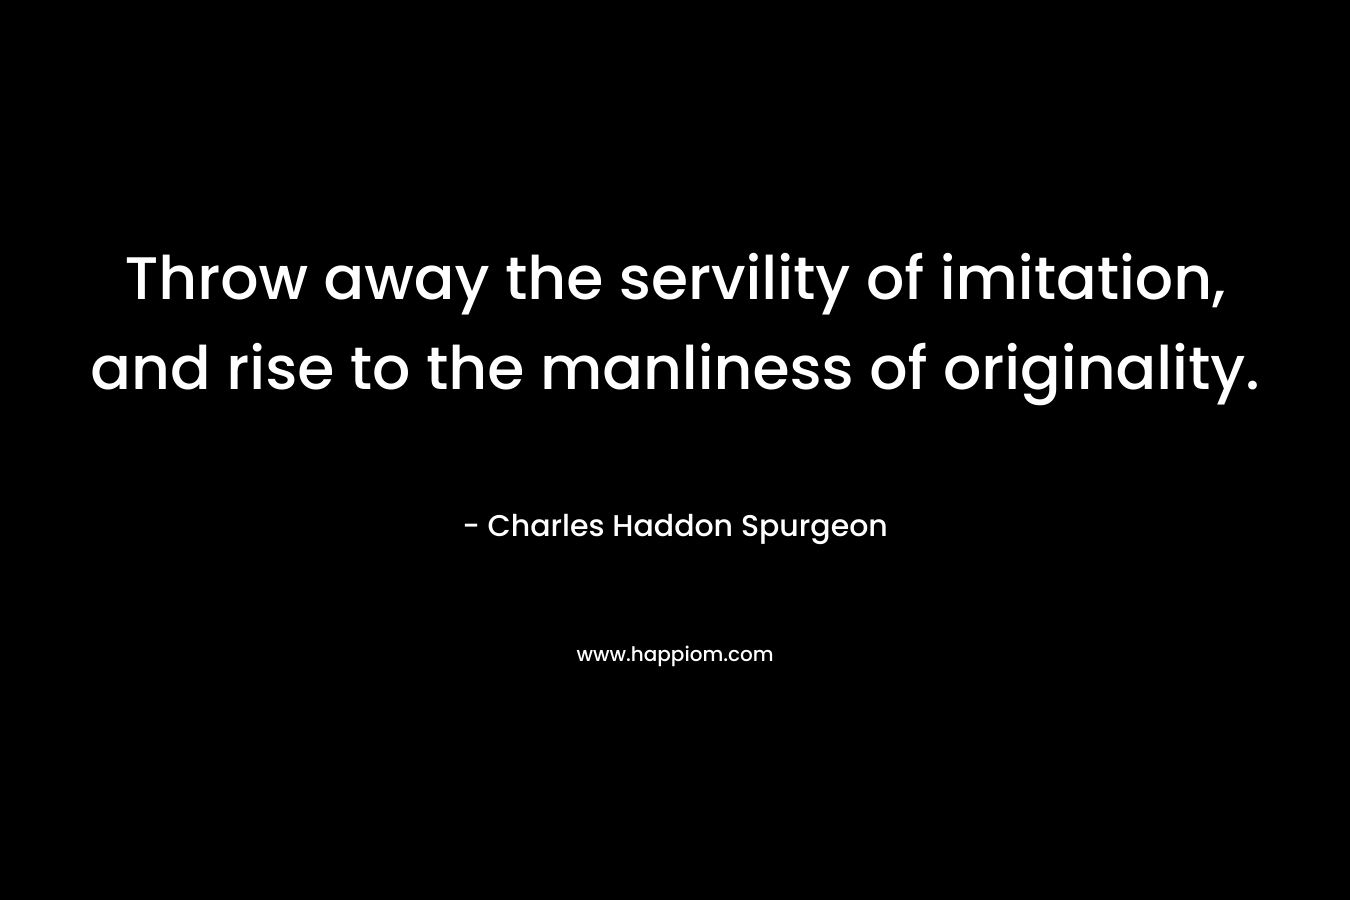 Throw away the servility of imitation, and rise to the manliness of originality.